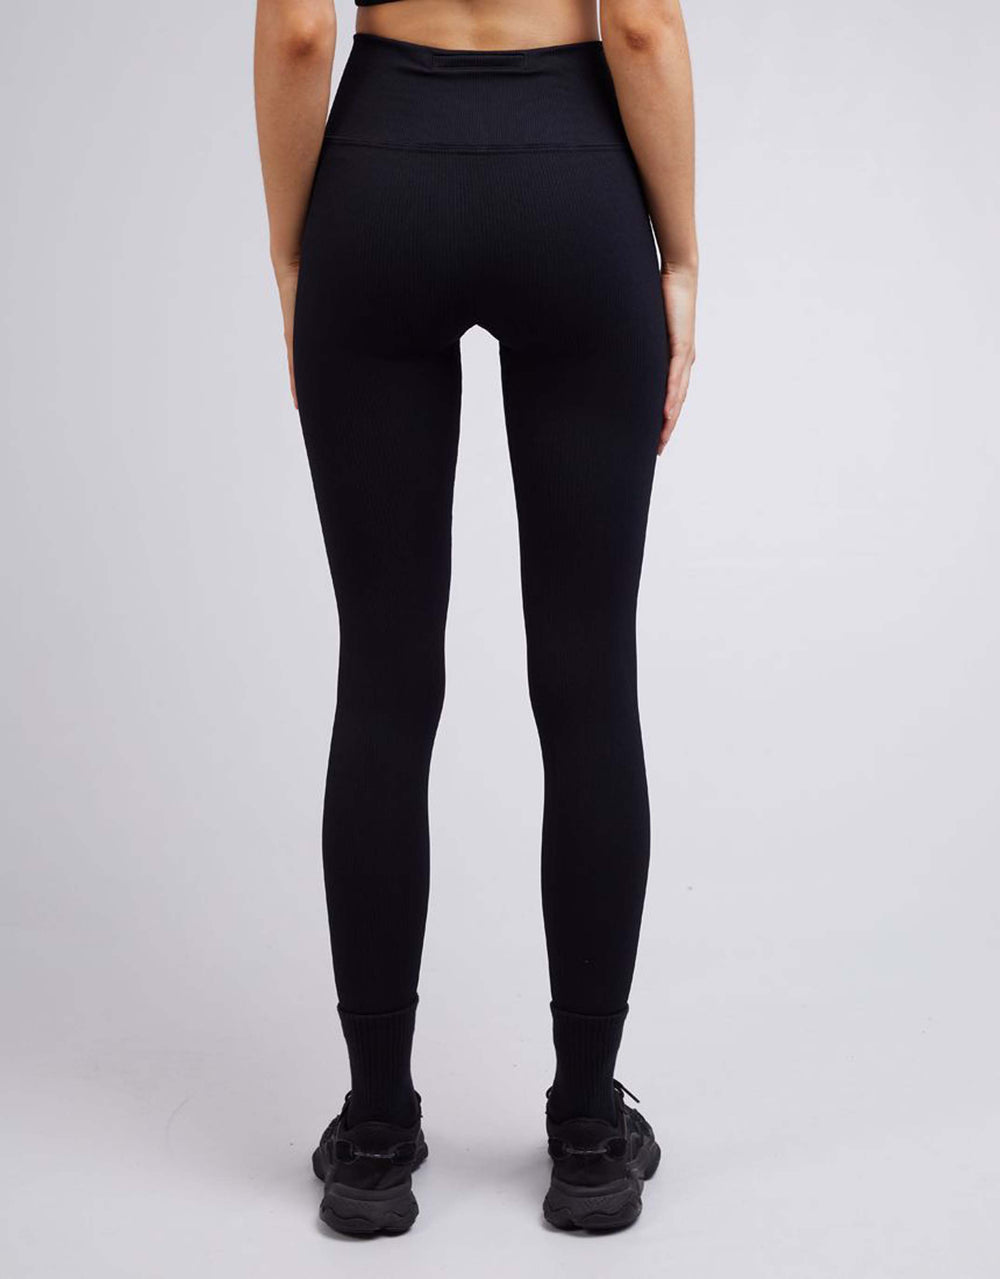 all-about-eve-remi-rib-legging-black-womens-clothing